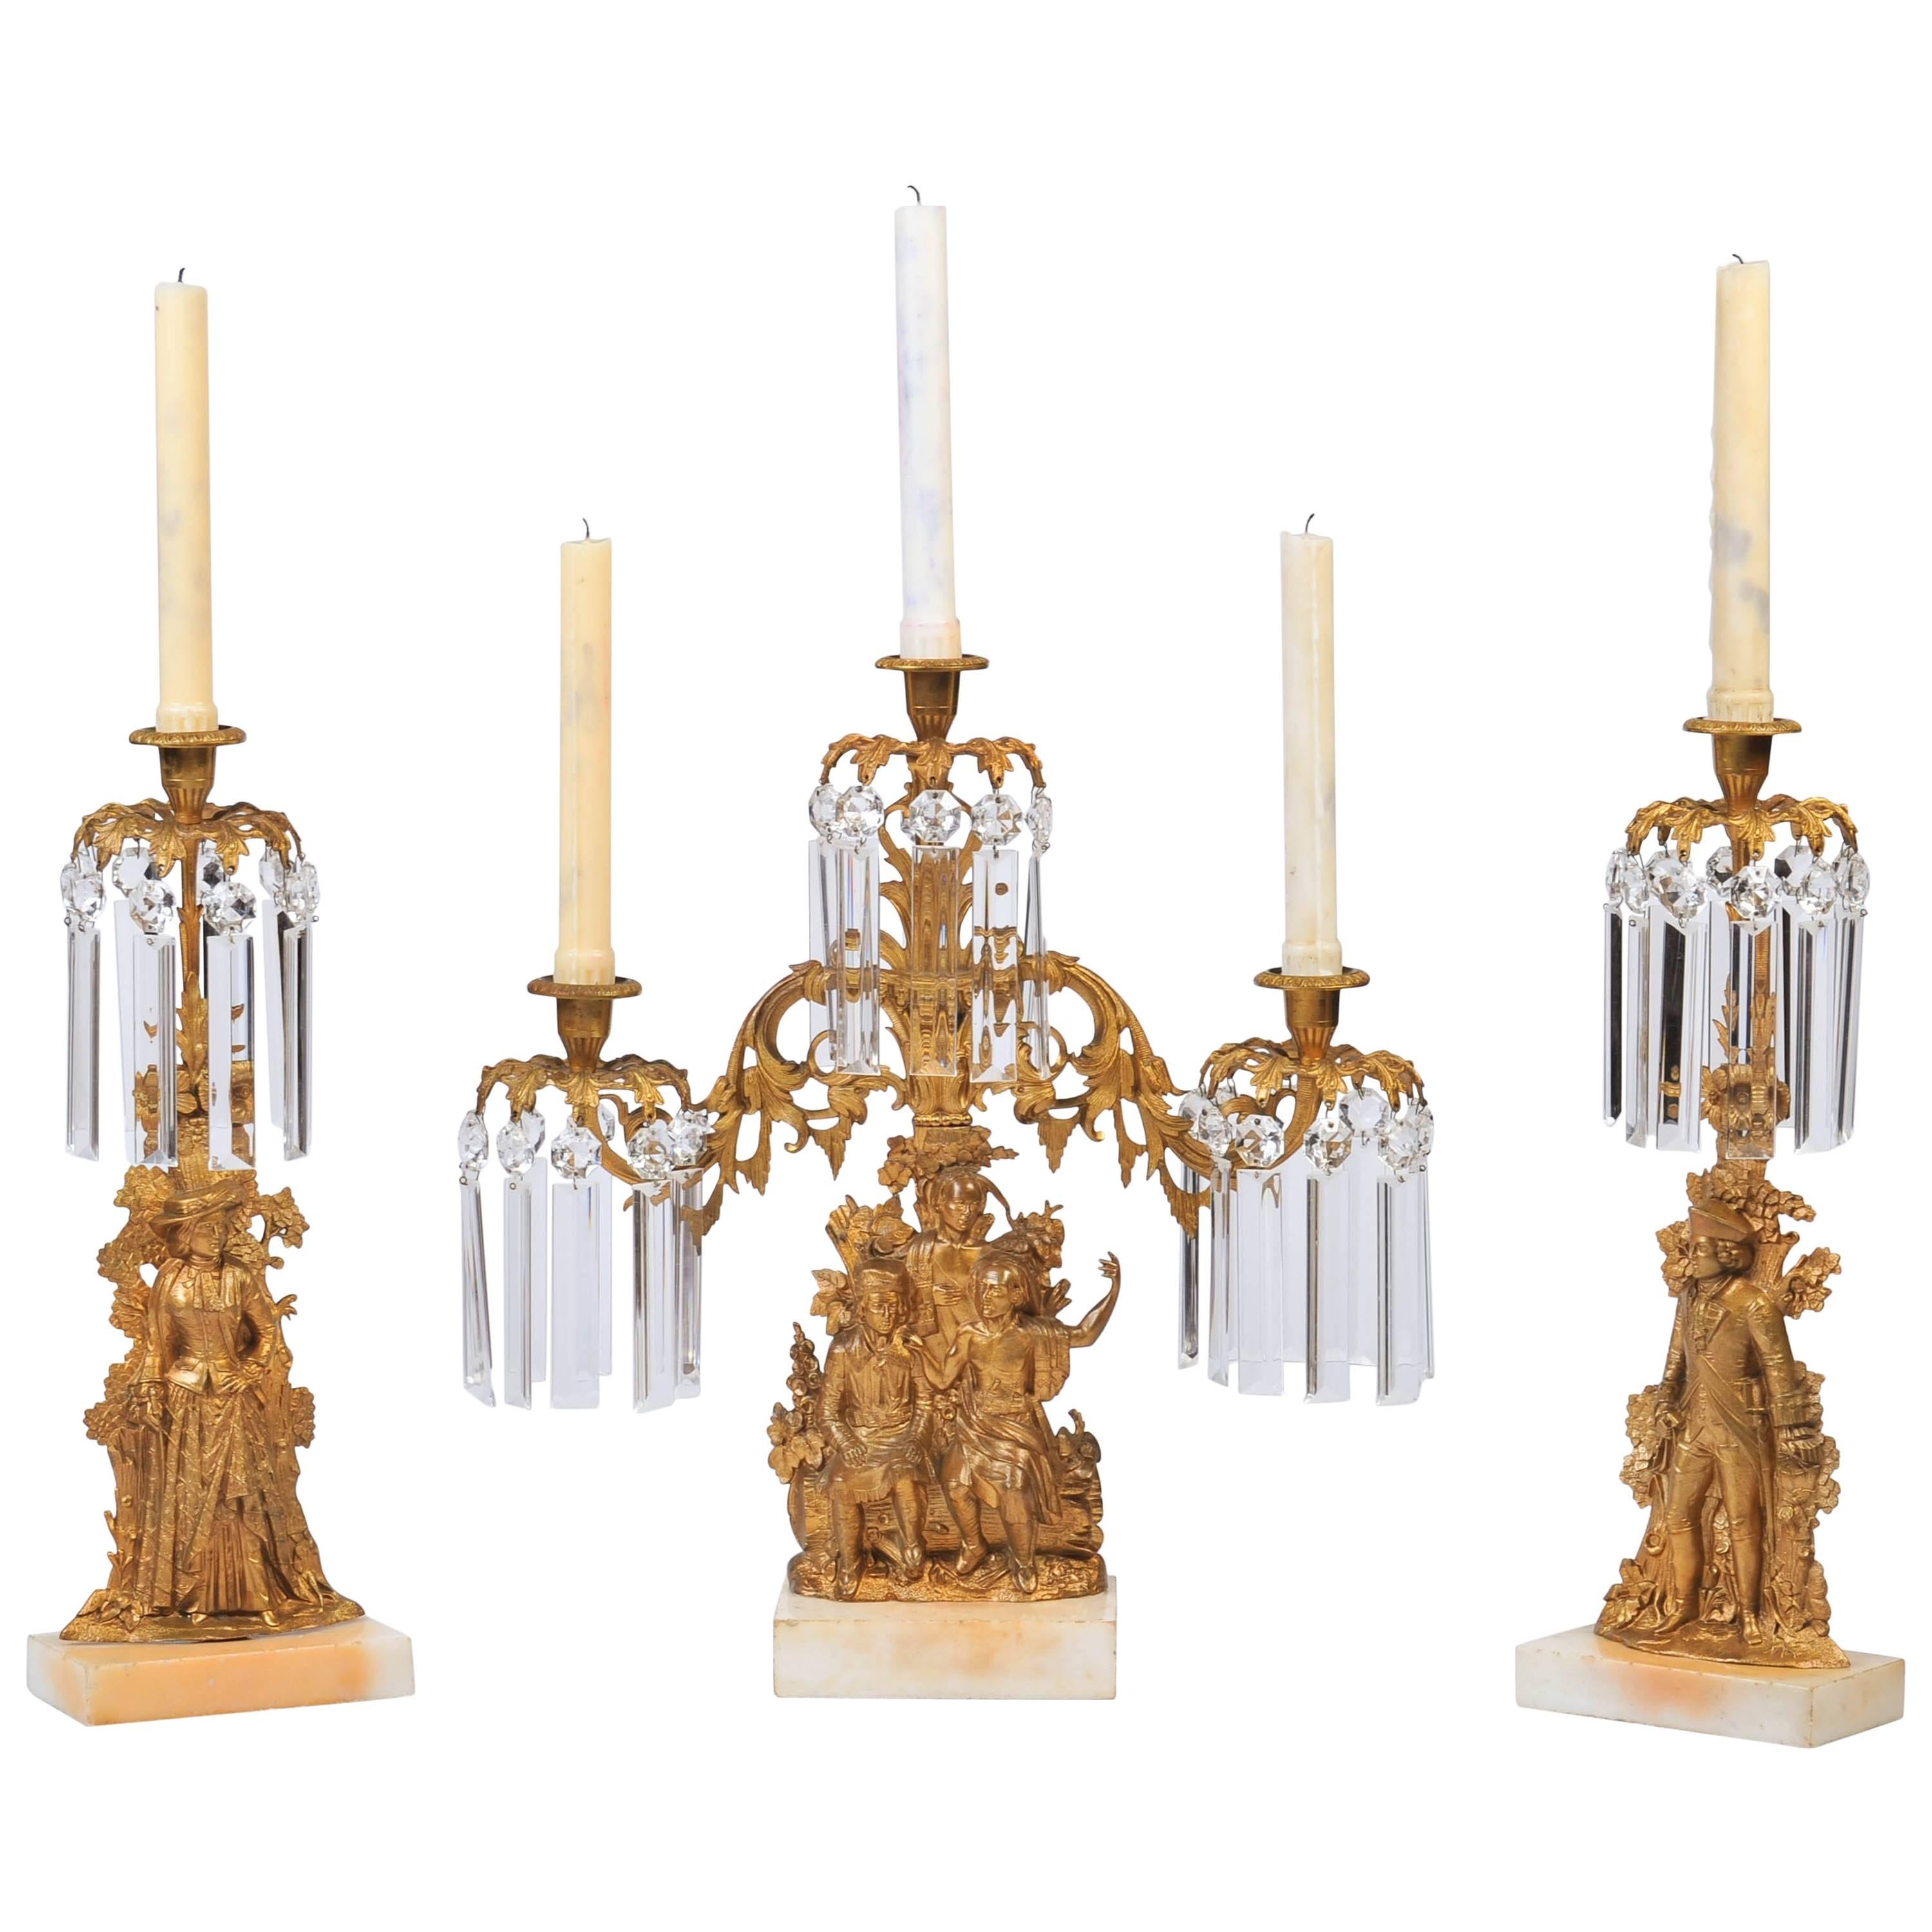 Last of the Mohicans. Set 3 Gilt Brass Figurative Candlesticks by Cornelius & Co